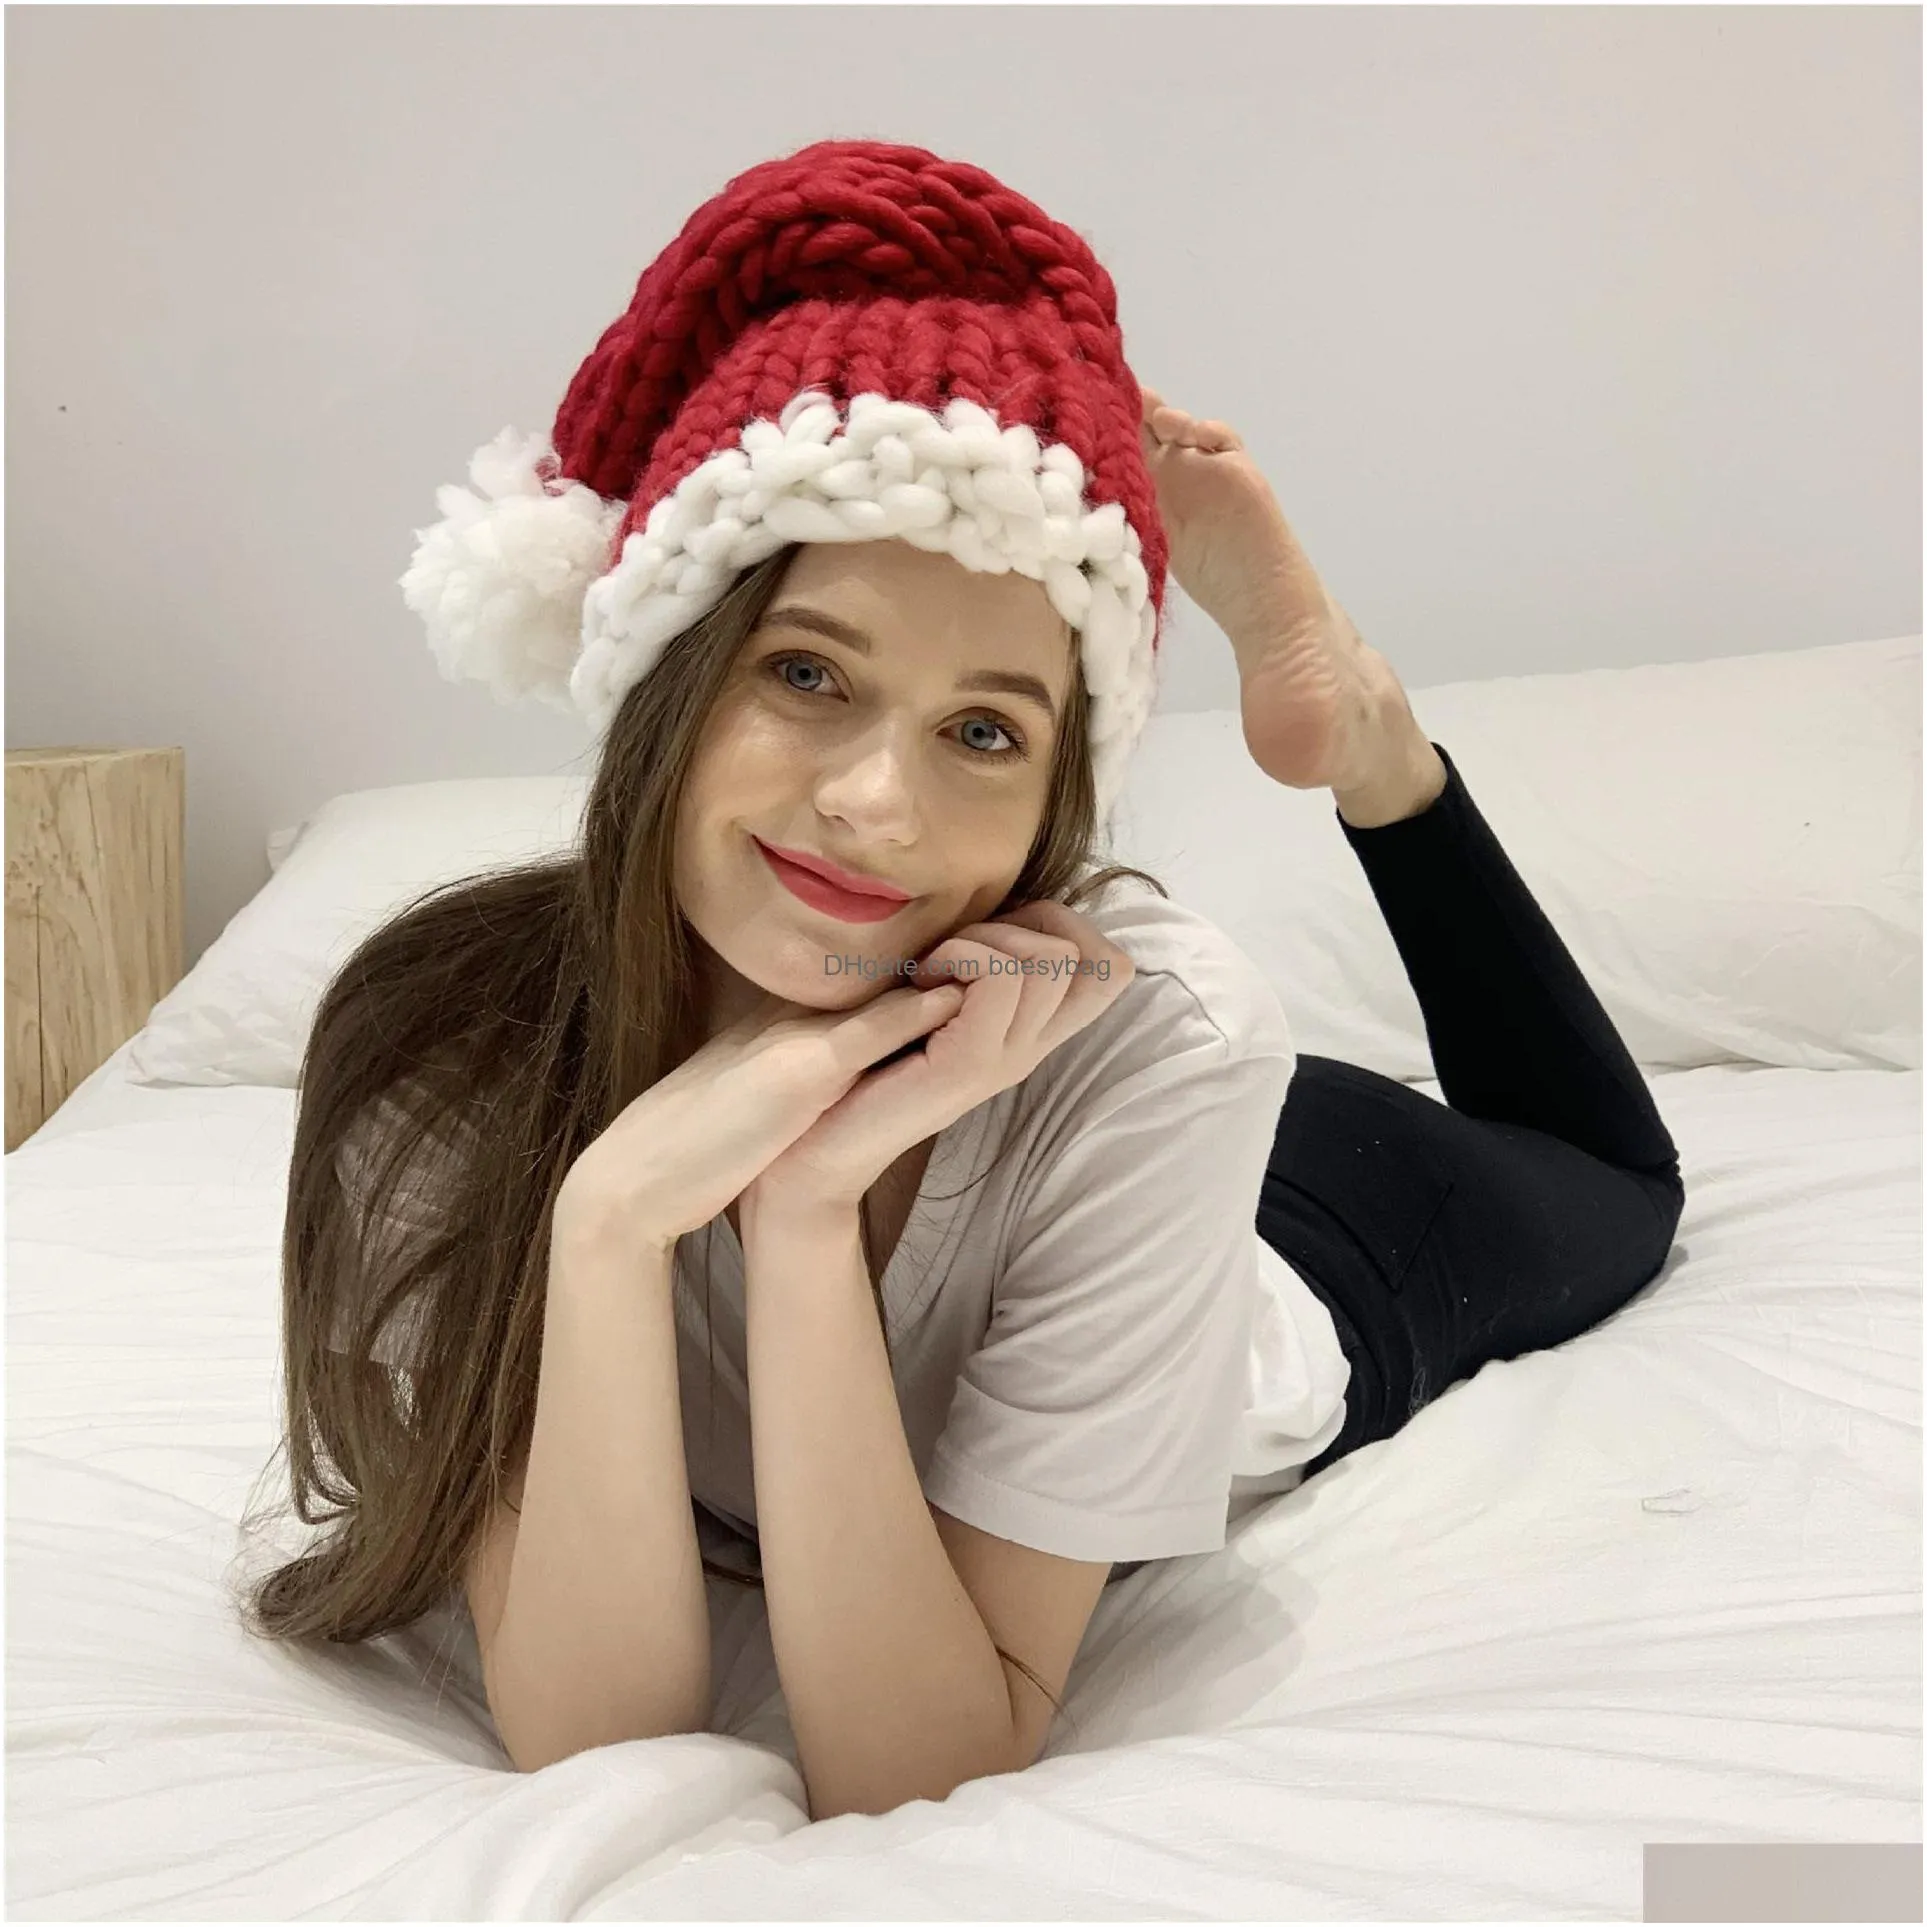 2020 new styles wool knit hats christmas hat fashion home outdoor party autumn winter warm hat xmas gift party favor indoor tree decor